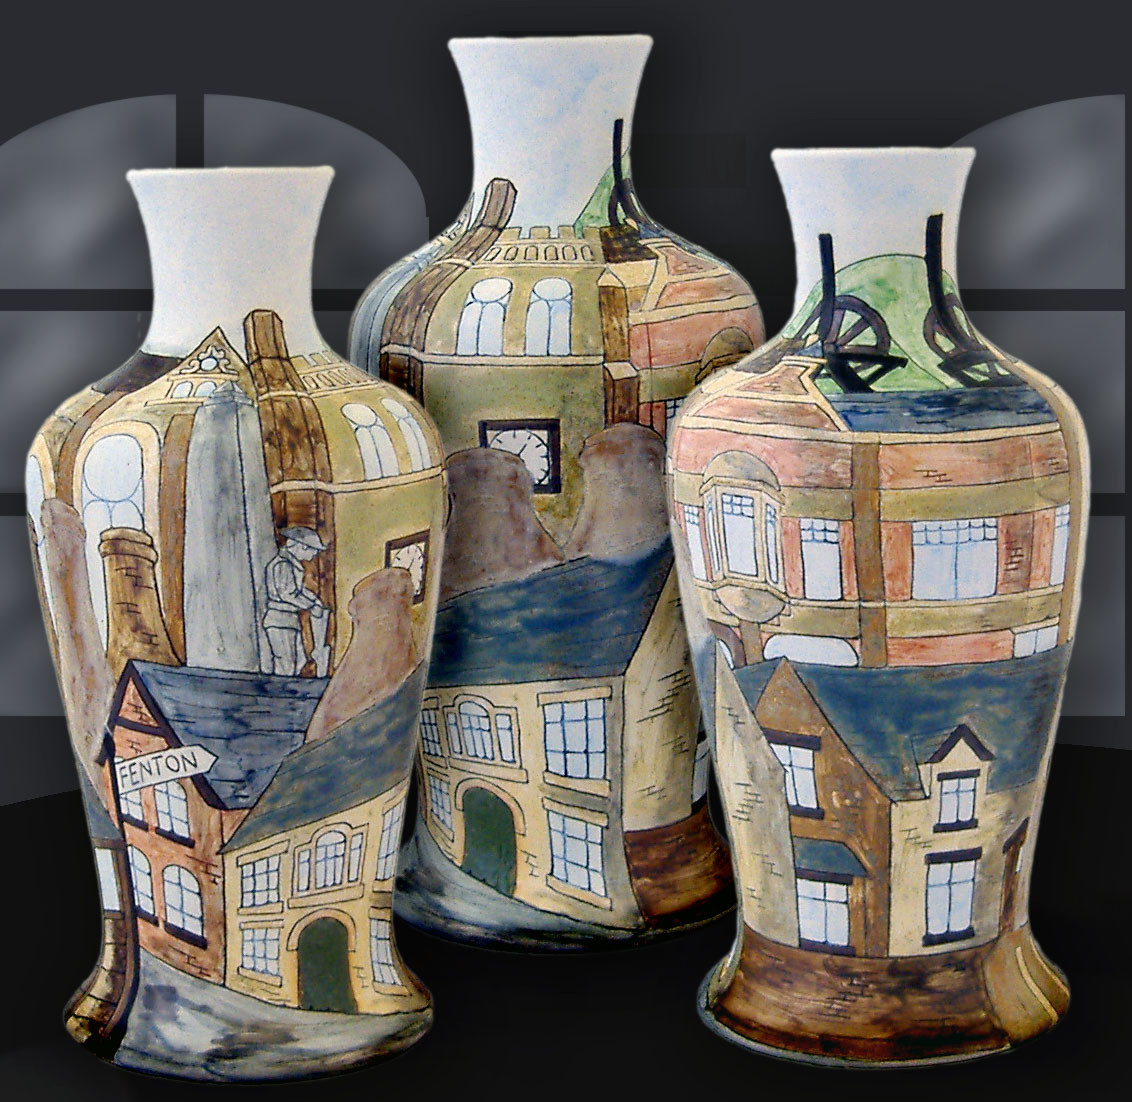 19 Amazing Old Chinese Vase Markings 2024 free download old chinese vase markings of burslem pottery designed vase shop stoke on trent for there are six towns that make up the city of stoke on trent this is the 30cm vase showing well known land m